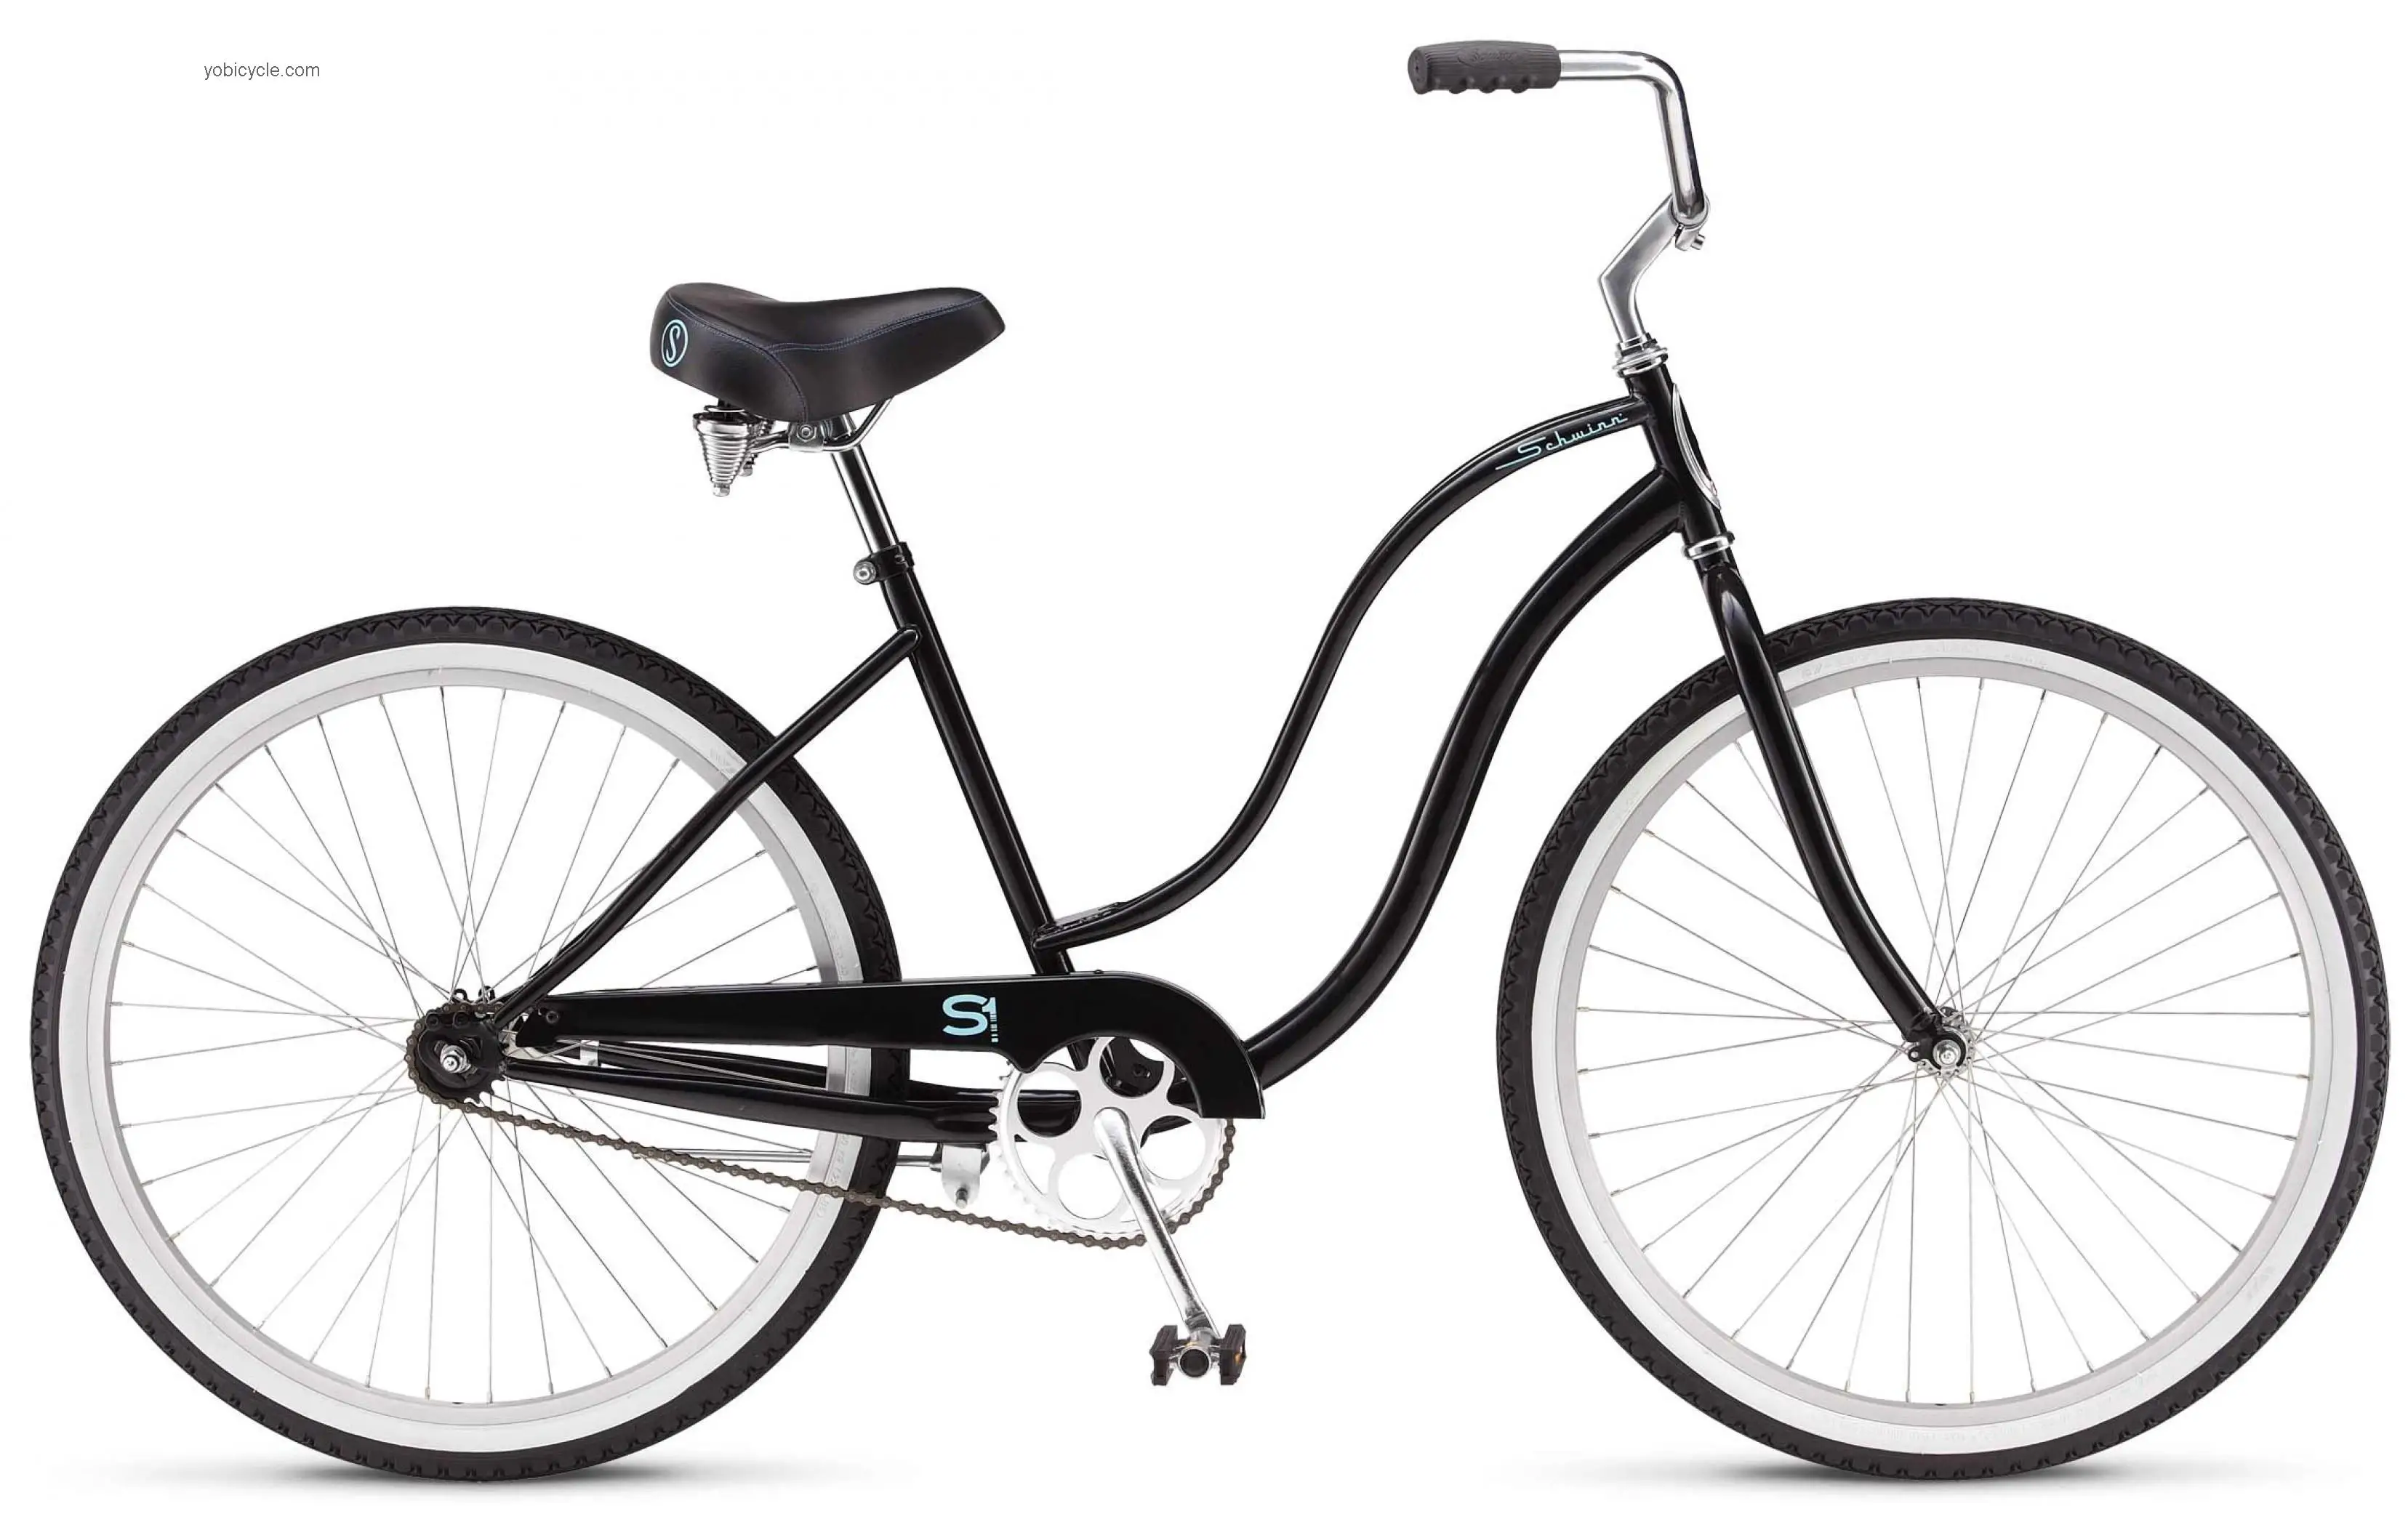 Schwinn S1 competitors and comparison tool online specs and performance